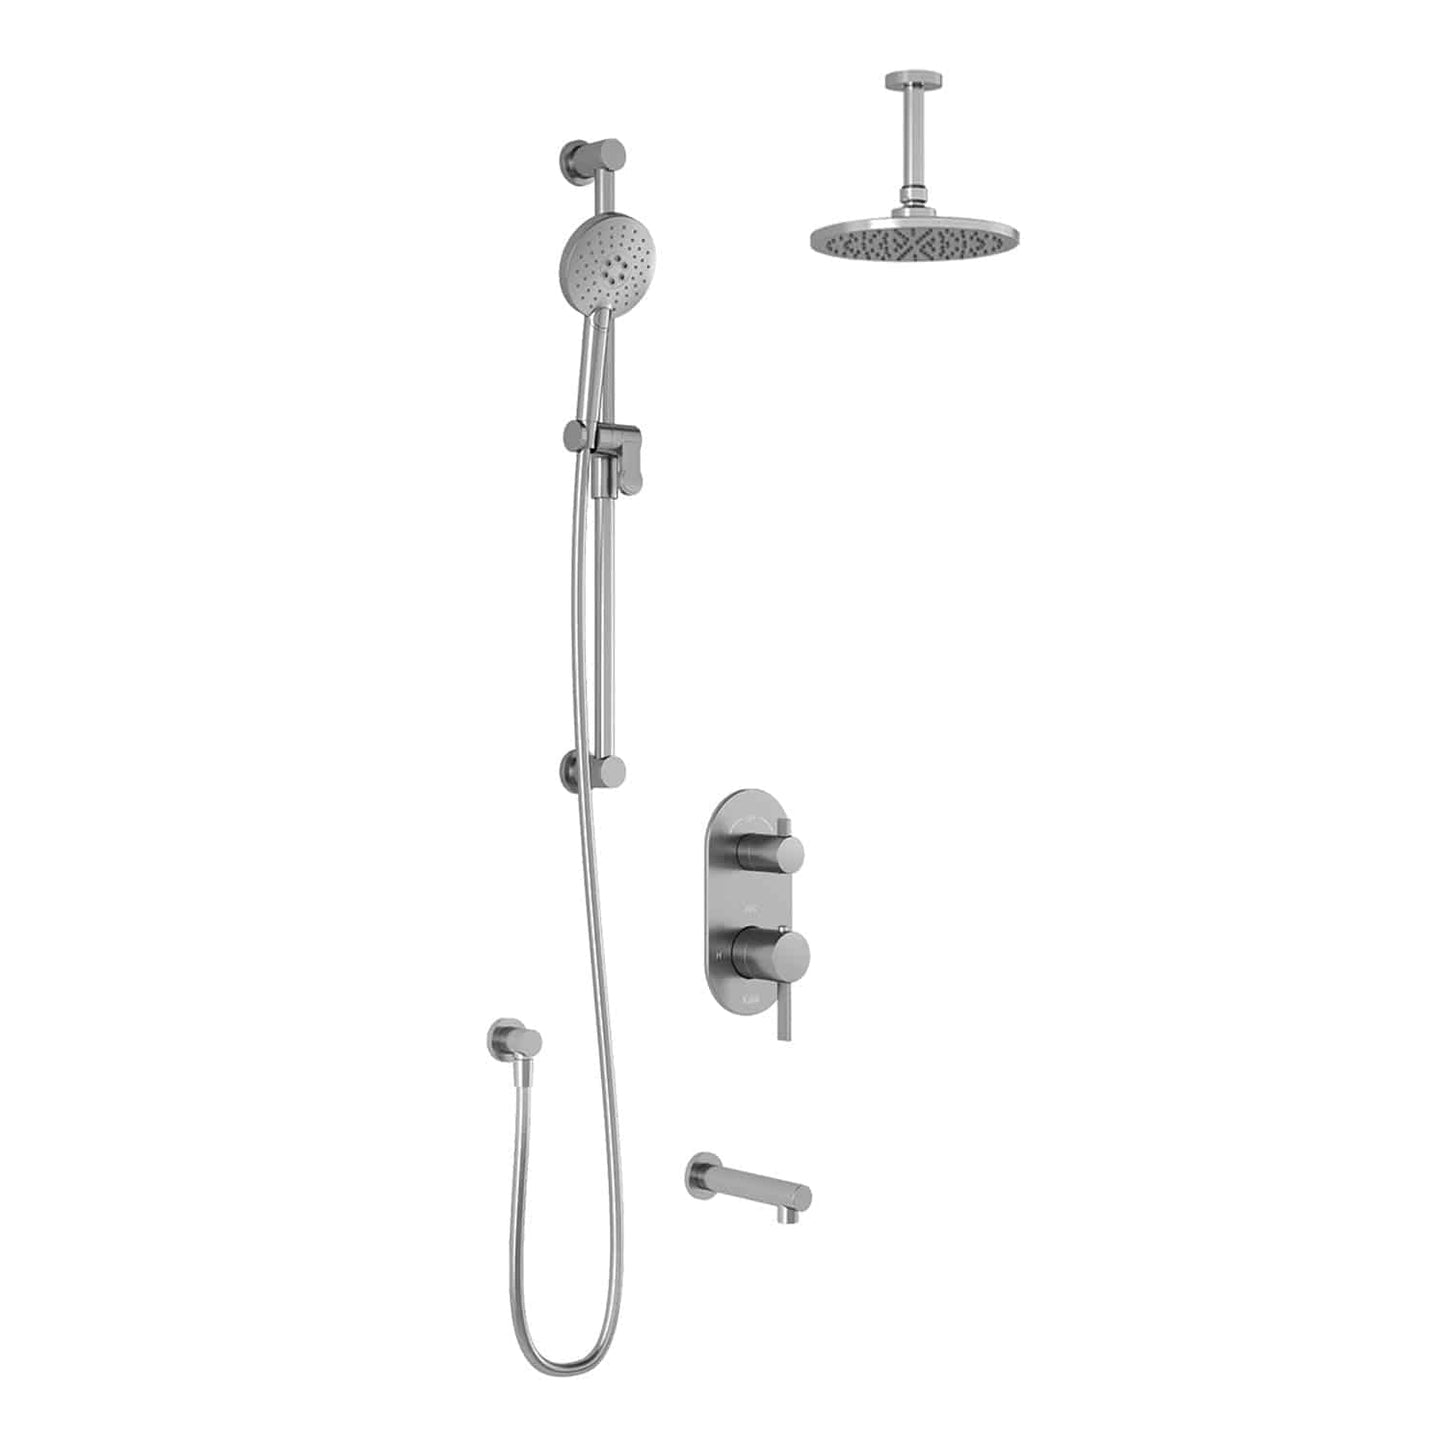 Kalia RoundOne TD3 AQUATONIK T/P with Diverter Shower System with Vertical Ceiling Arm- Chrome